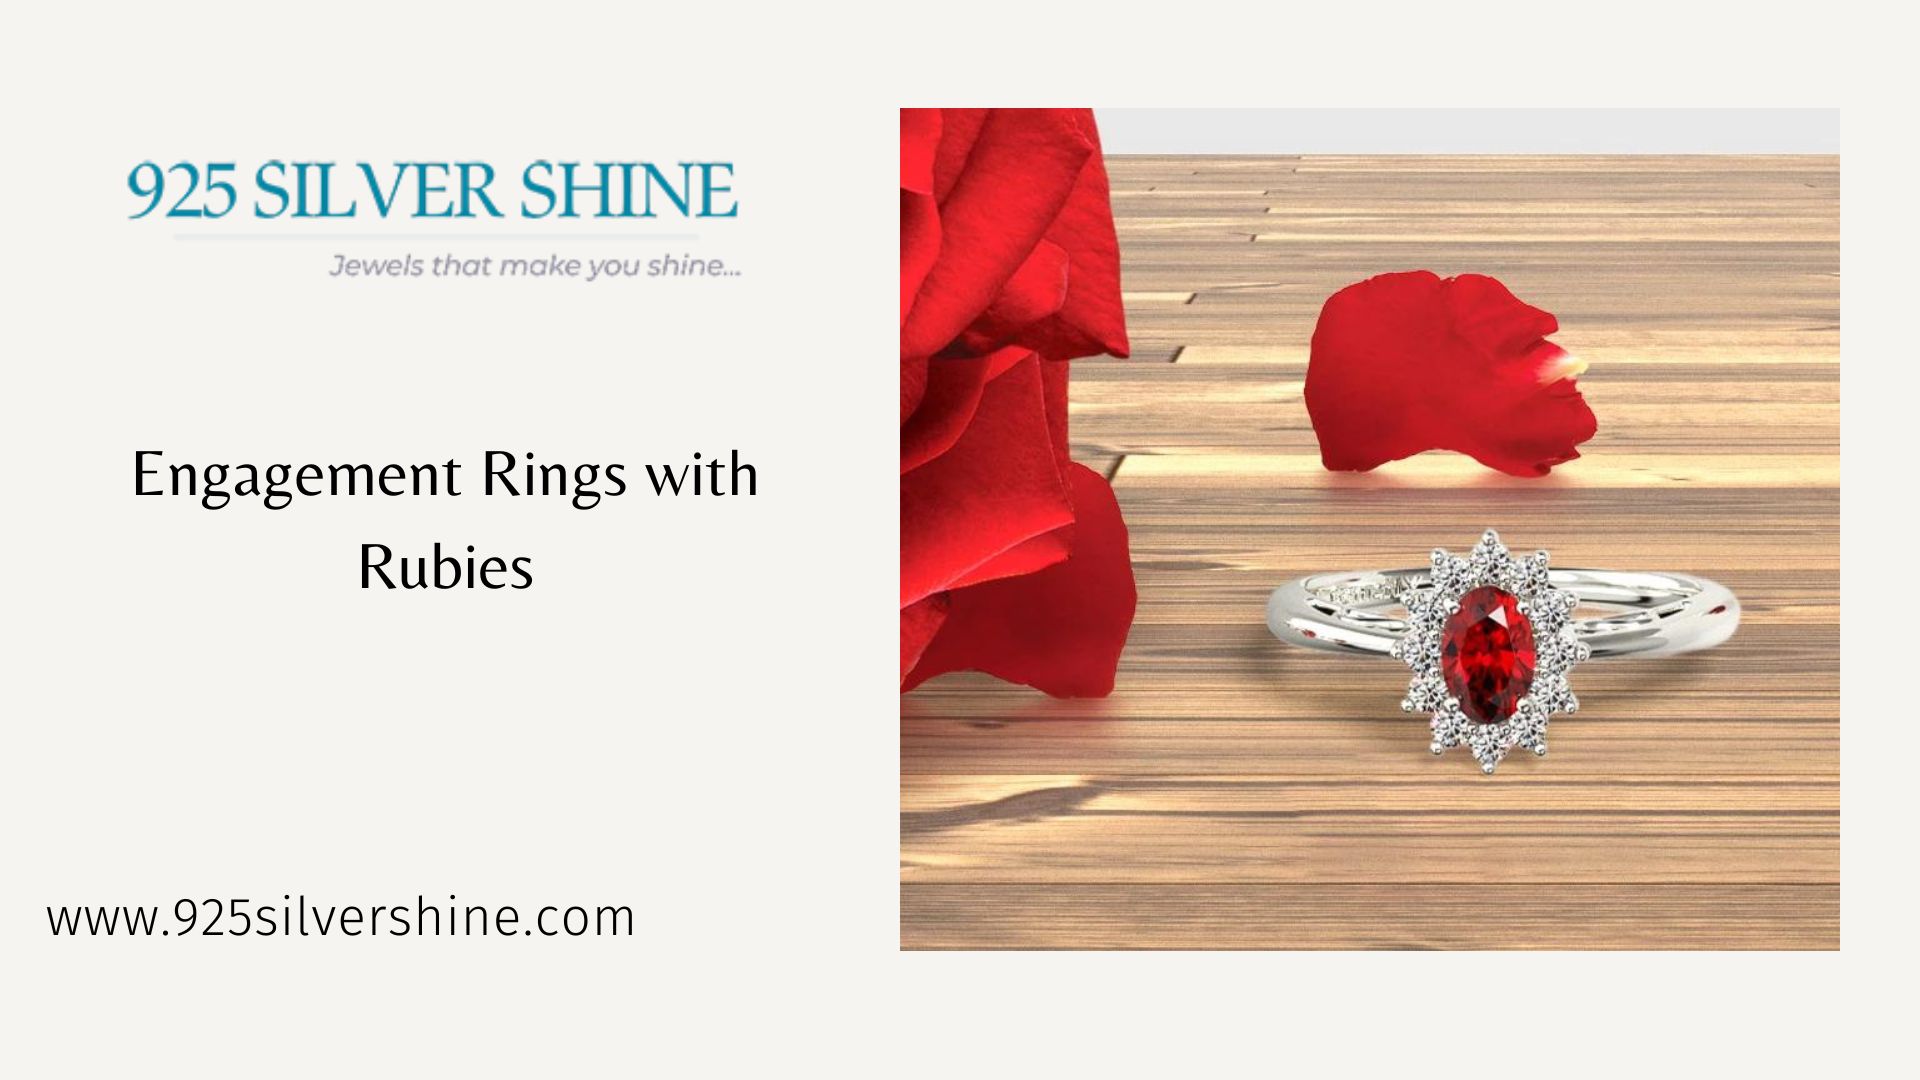 july birthstone, cancer zodiac birth month, cancer birthstone, ruby jewelry, benefits of ruby, what is the birthstone for july, ruby engagement rings, july 29 birthstone, july 23 birthstone, july 25th birthstone, july 30 birthstone, top 10 benefits of ruby stone, july birthstone cancer, july birthstone pandora ring, ruby birthstone jewelry, ruby jewellery for men, ruby vintage jewelry, july birthstone uk, benefits of wearing ruby ring, ruby jewelry australia, what are the advantages of using silver ruby jewelry, ruby jewelry for women, july birthstone earrings pandora, july birthstone engagement rings, july birthstone ring for men, july birthstone carnelian, july birthstone stud earrings, july birthstone necklace for mom, july birthstone garnet, july and october birthstone ring, ruby stone benefits and side effects, benefits of wearing ruby in index finger, birthstone july australia, july leo birthstone, july birthstone month, july birthstone moonstone, july birthstone zodiac sign, ruby jewelry bracelets, benefits of wearing ruby and panna together, july birthstone bracelet, july first birthstone, what is your birthstone if your born in july, ruby jewelry for 40th wedding anniversary, natural ruby benefits, july birthstone anklet, july birthstone ring silver, july birthstone stackable ring, july birthstone silver necklace, july birthstone wedding ring, july zodiac birthstone, july 31 zodiac birthstone, ruby wholesale jewelry, benefits of ruby stone in astrology, benefits of wearing ruby in middle finger, july birthstone jewellery uk, ruby jewelry los angeles, july birthstone gift for mom, july birthstone gift ideas for her, july gemini birthstone, july birthstone idea, women's july birthstone jewelry, men's july birthstone jewelry, july 31 leo birthstone, ruby ethnic jewelry, ruby jewelry for mom, ruby jewellery for baby girl, ruby gemstones, ruby gemstone jewelry wholesale, personalised ruby jewellery, healing properties of ruby stone, spiritual benefits of wearing ruby in ring, sterling silver ruby jewelry, 925 silver ruby jewelry, ruby jewelry with stelring silver, ruby ring, ruby earring, silver ruby jewelry India, july birthstone USA, ruby stone significance 